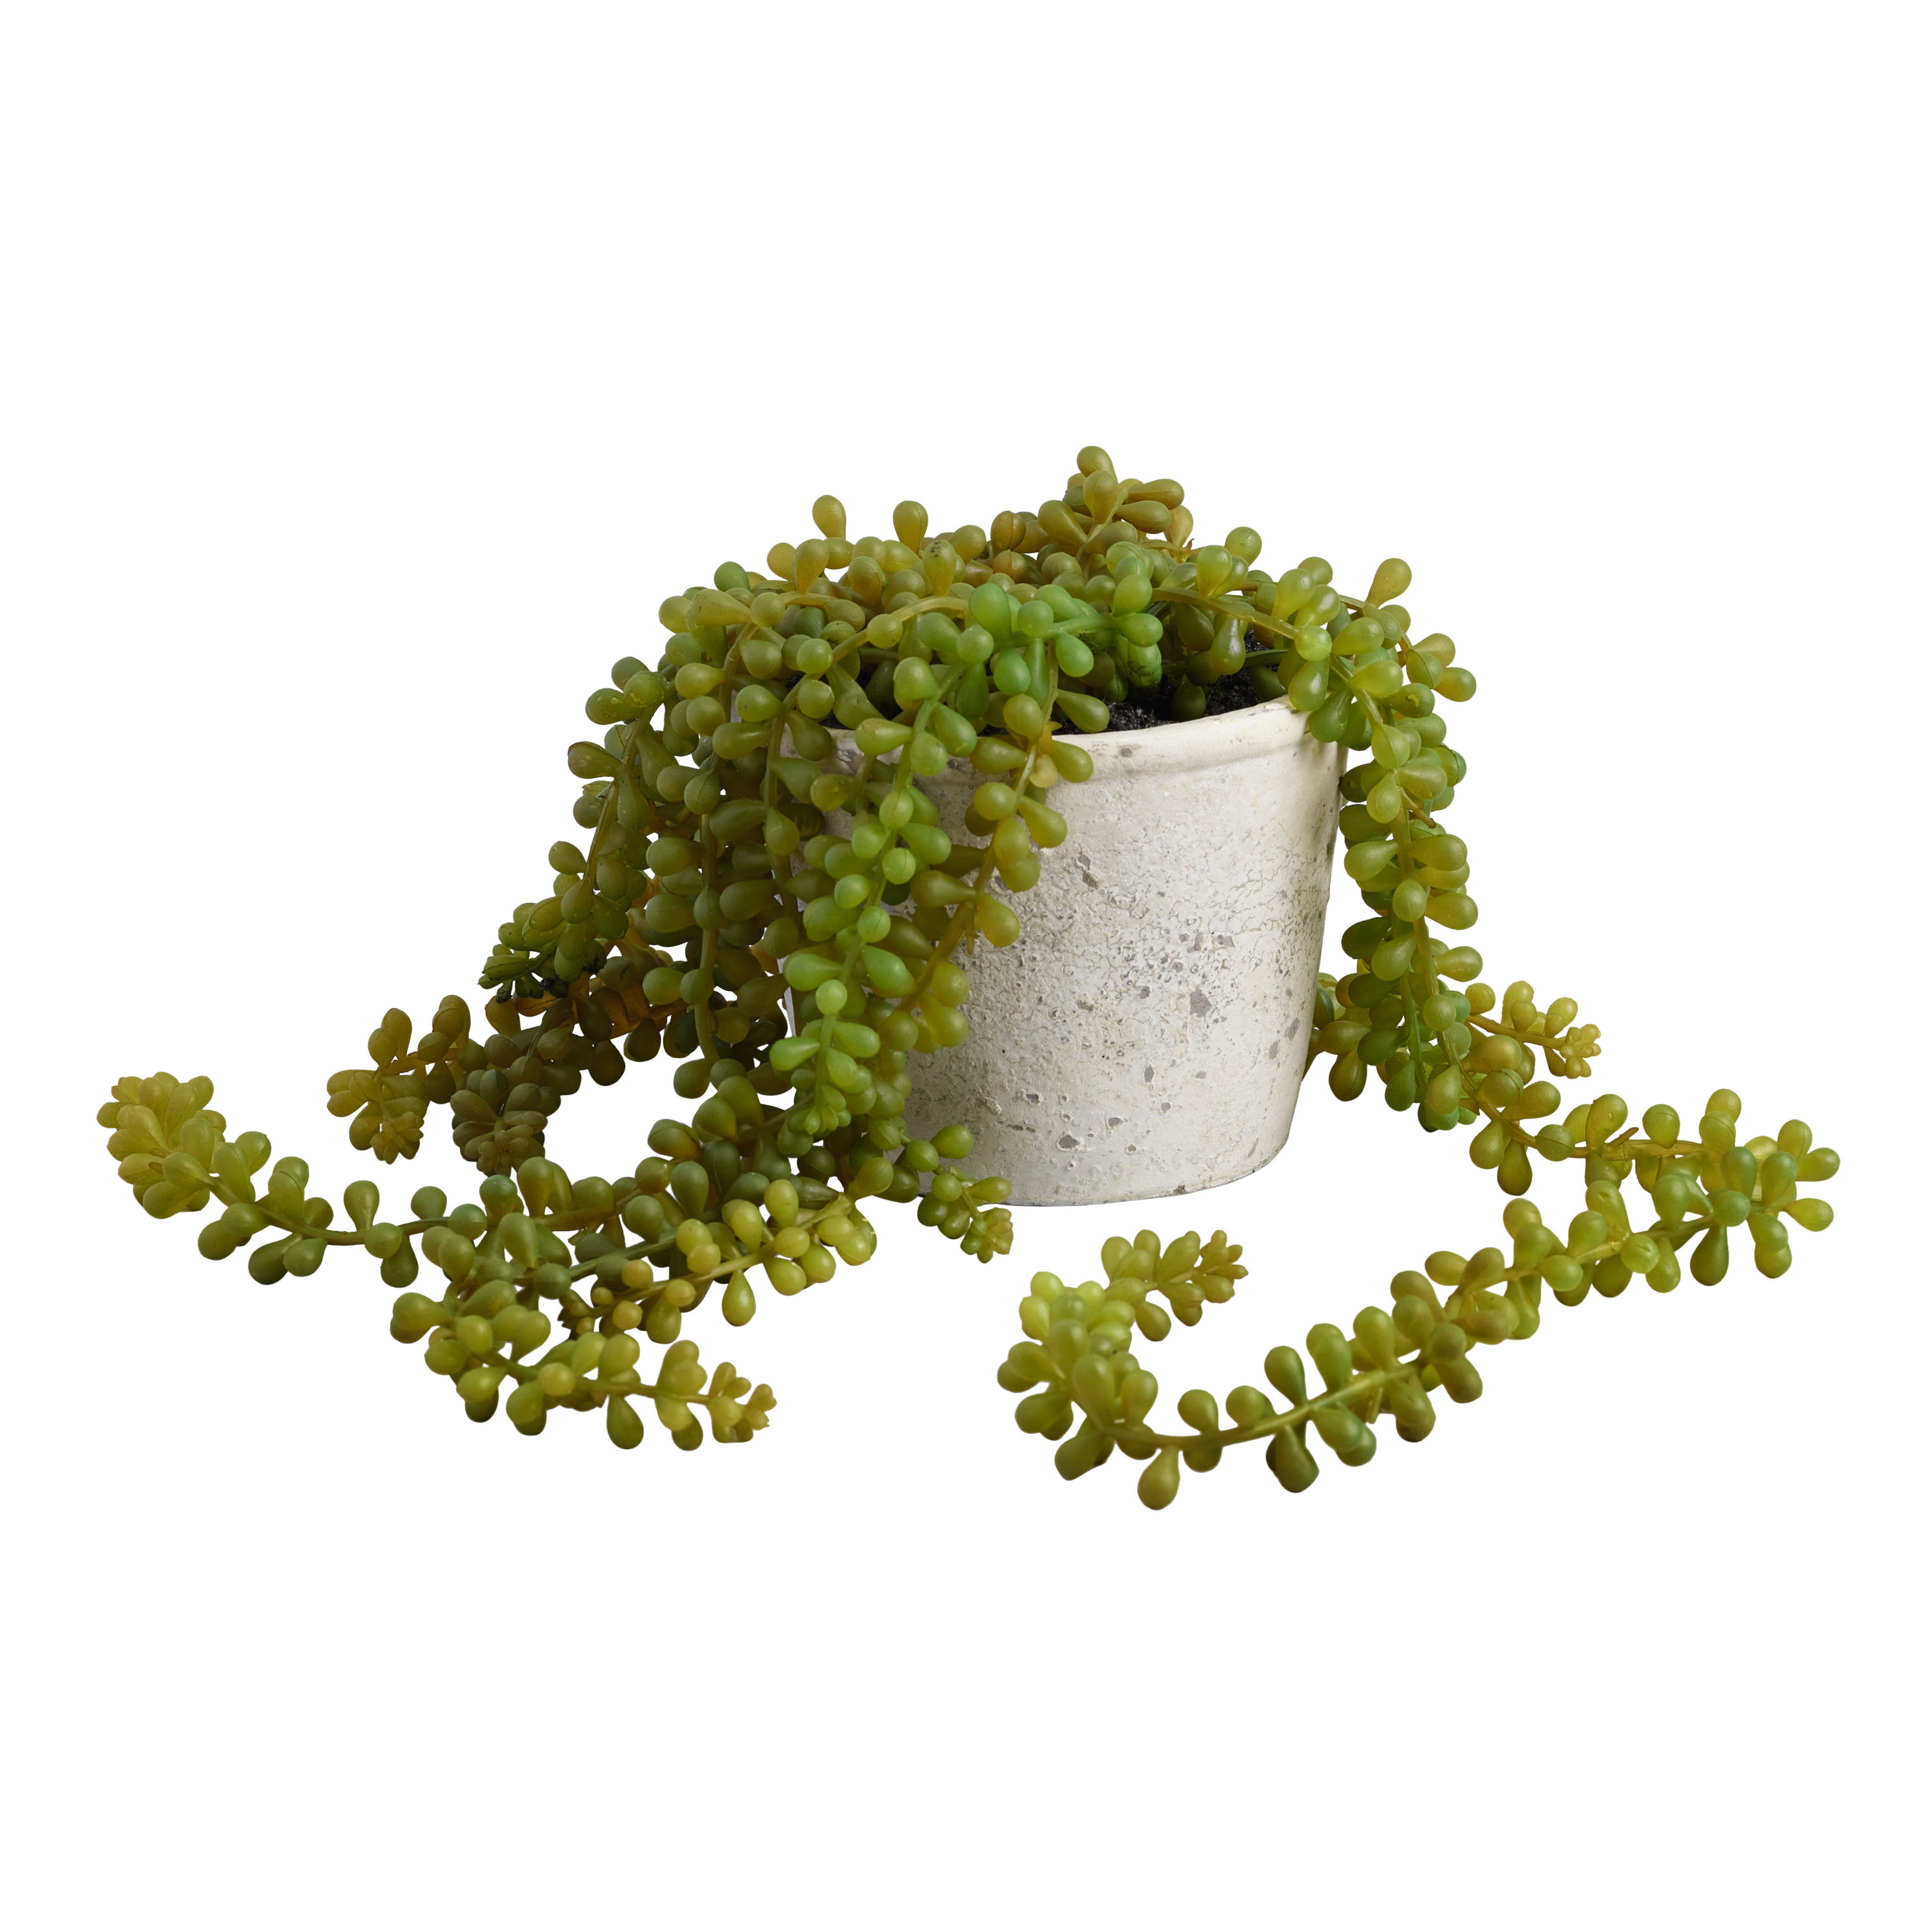 Artificial Plant STRING OF PEARLS in Ceramic Pot W/ Wood Stand - ONE-SIZE